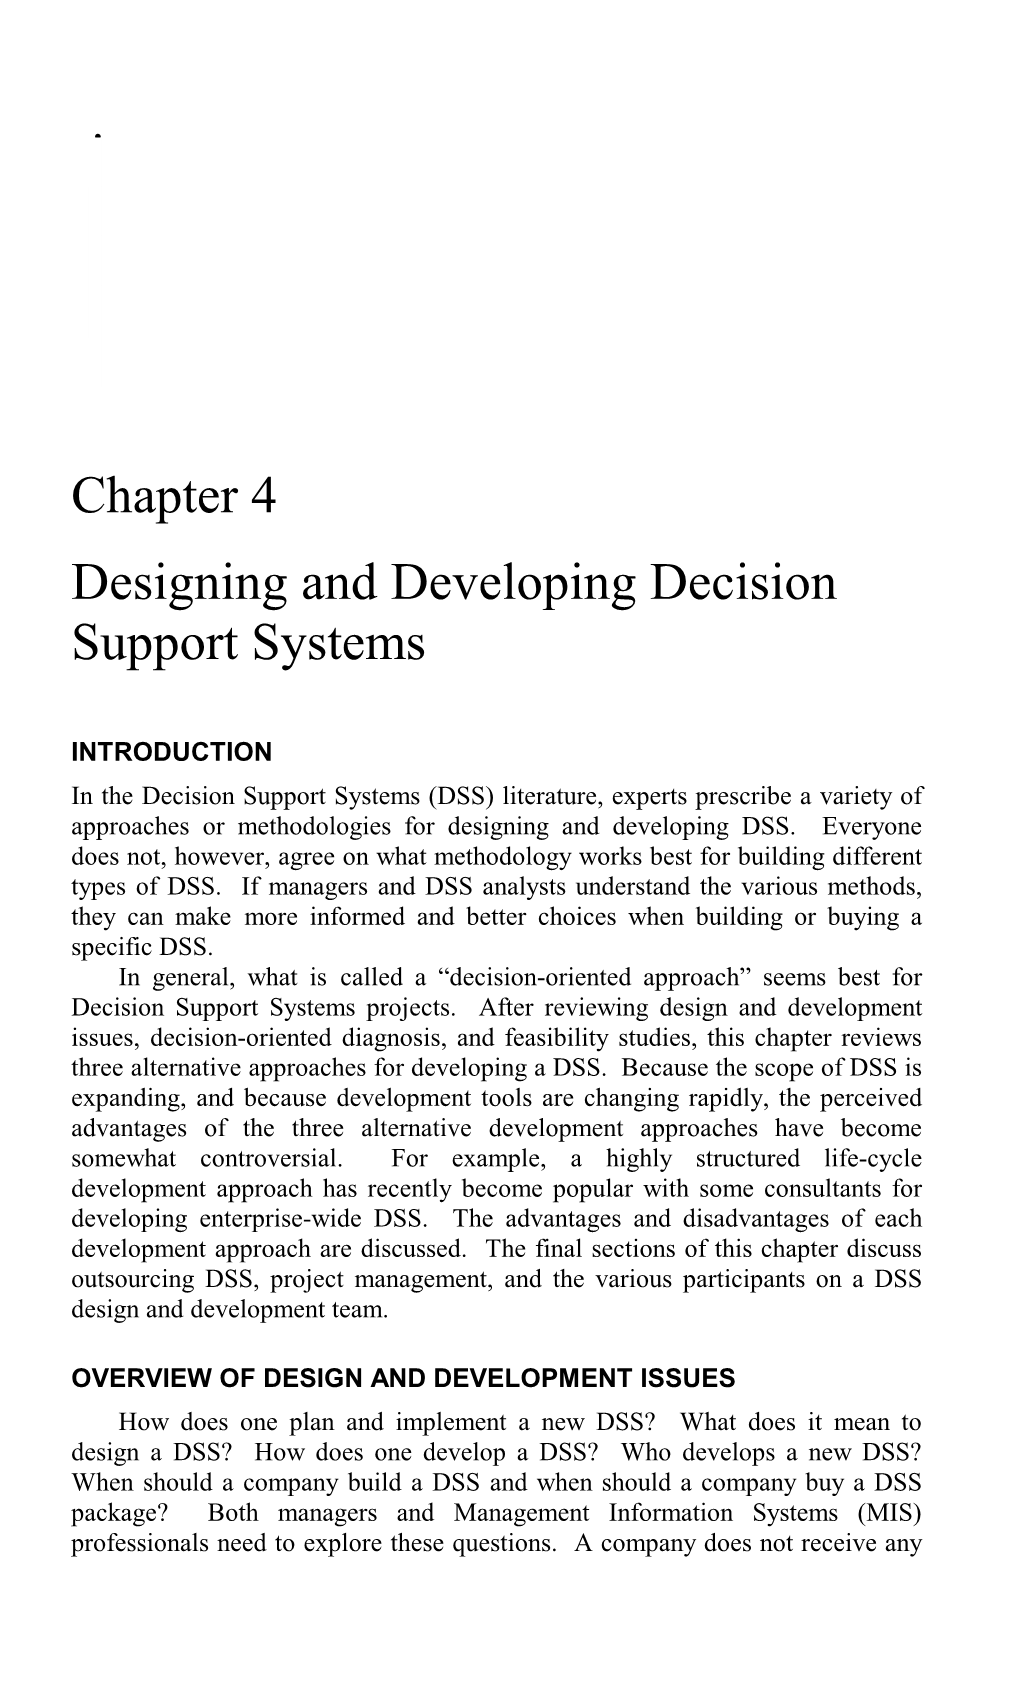 Chapter 4 Designing and Developing Decision Support Systems